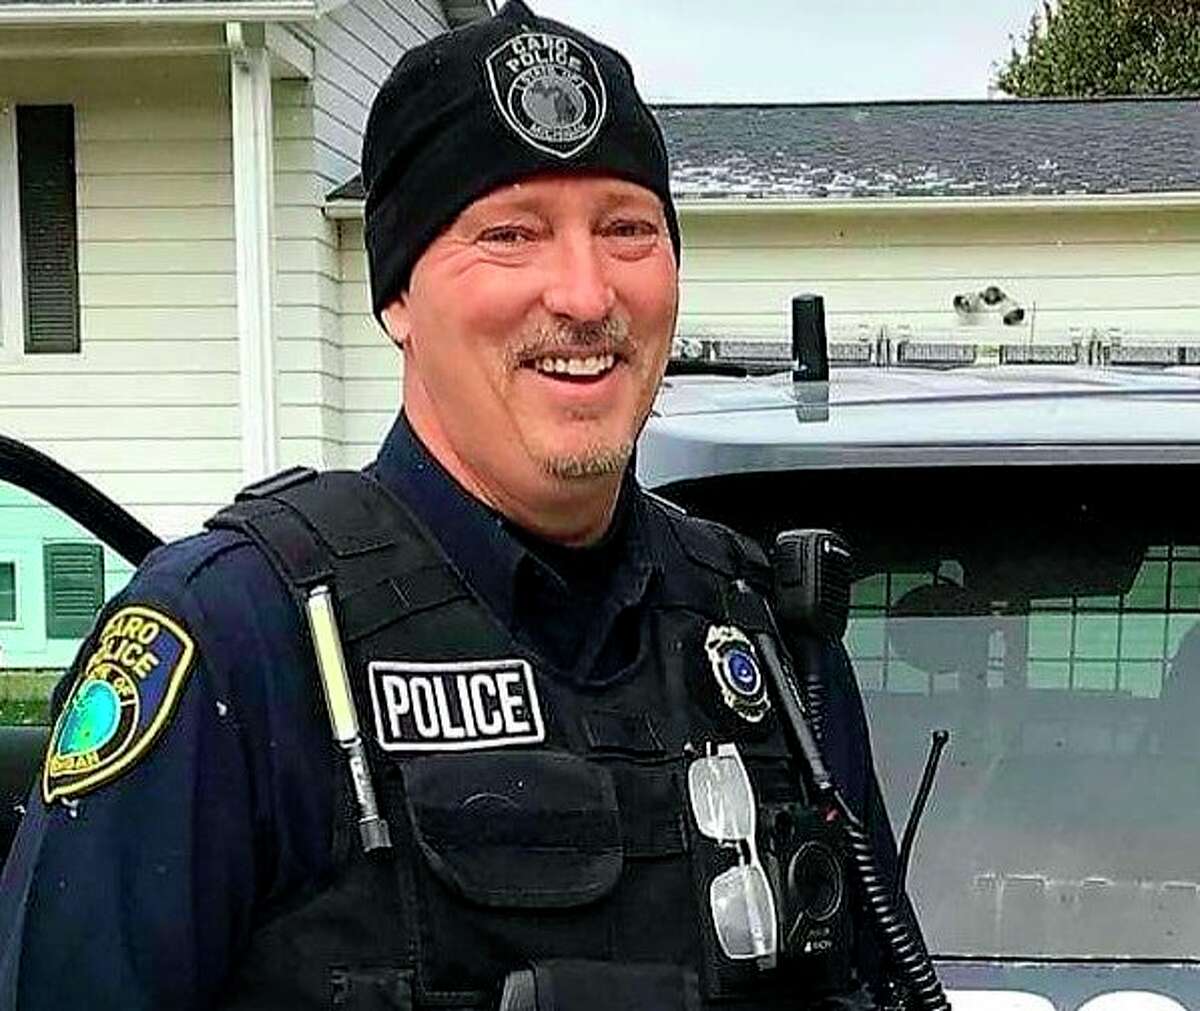 Because of a compromised immune system from cancer, Steve Repkie was sidelined as a police officer, but not for long. He could not let fellow officers work alone during such dangerous time. (Courtesy Photo)